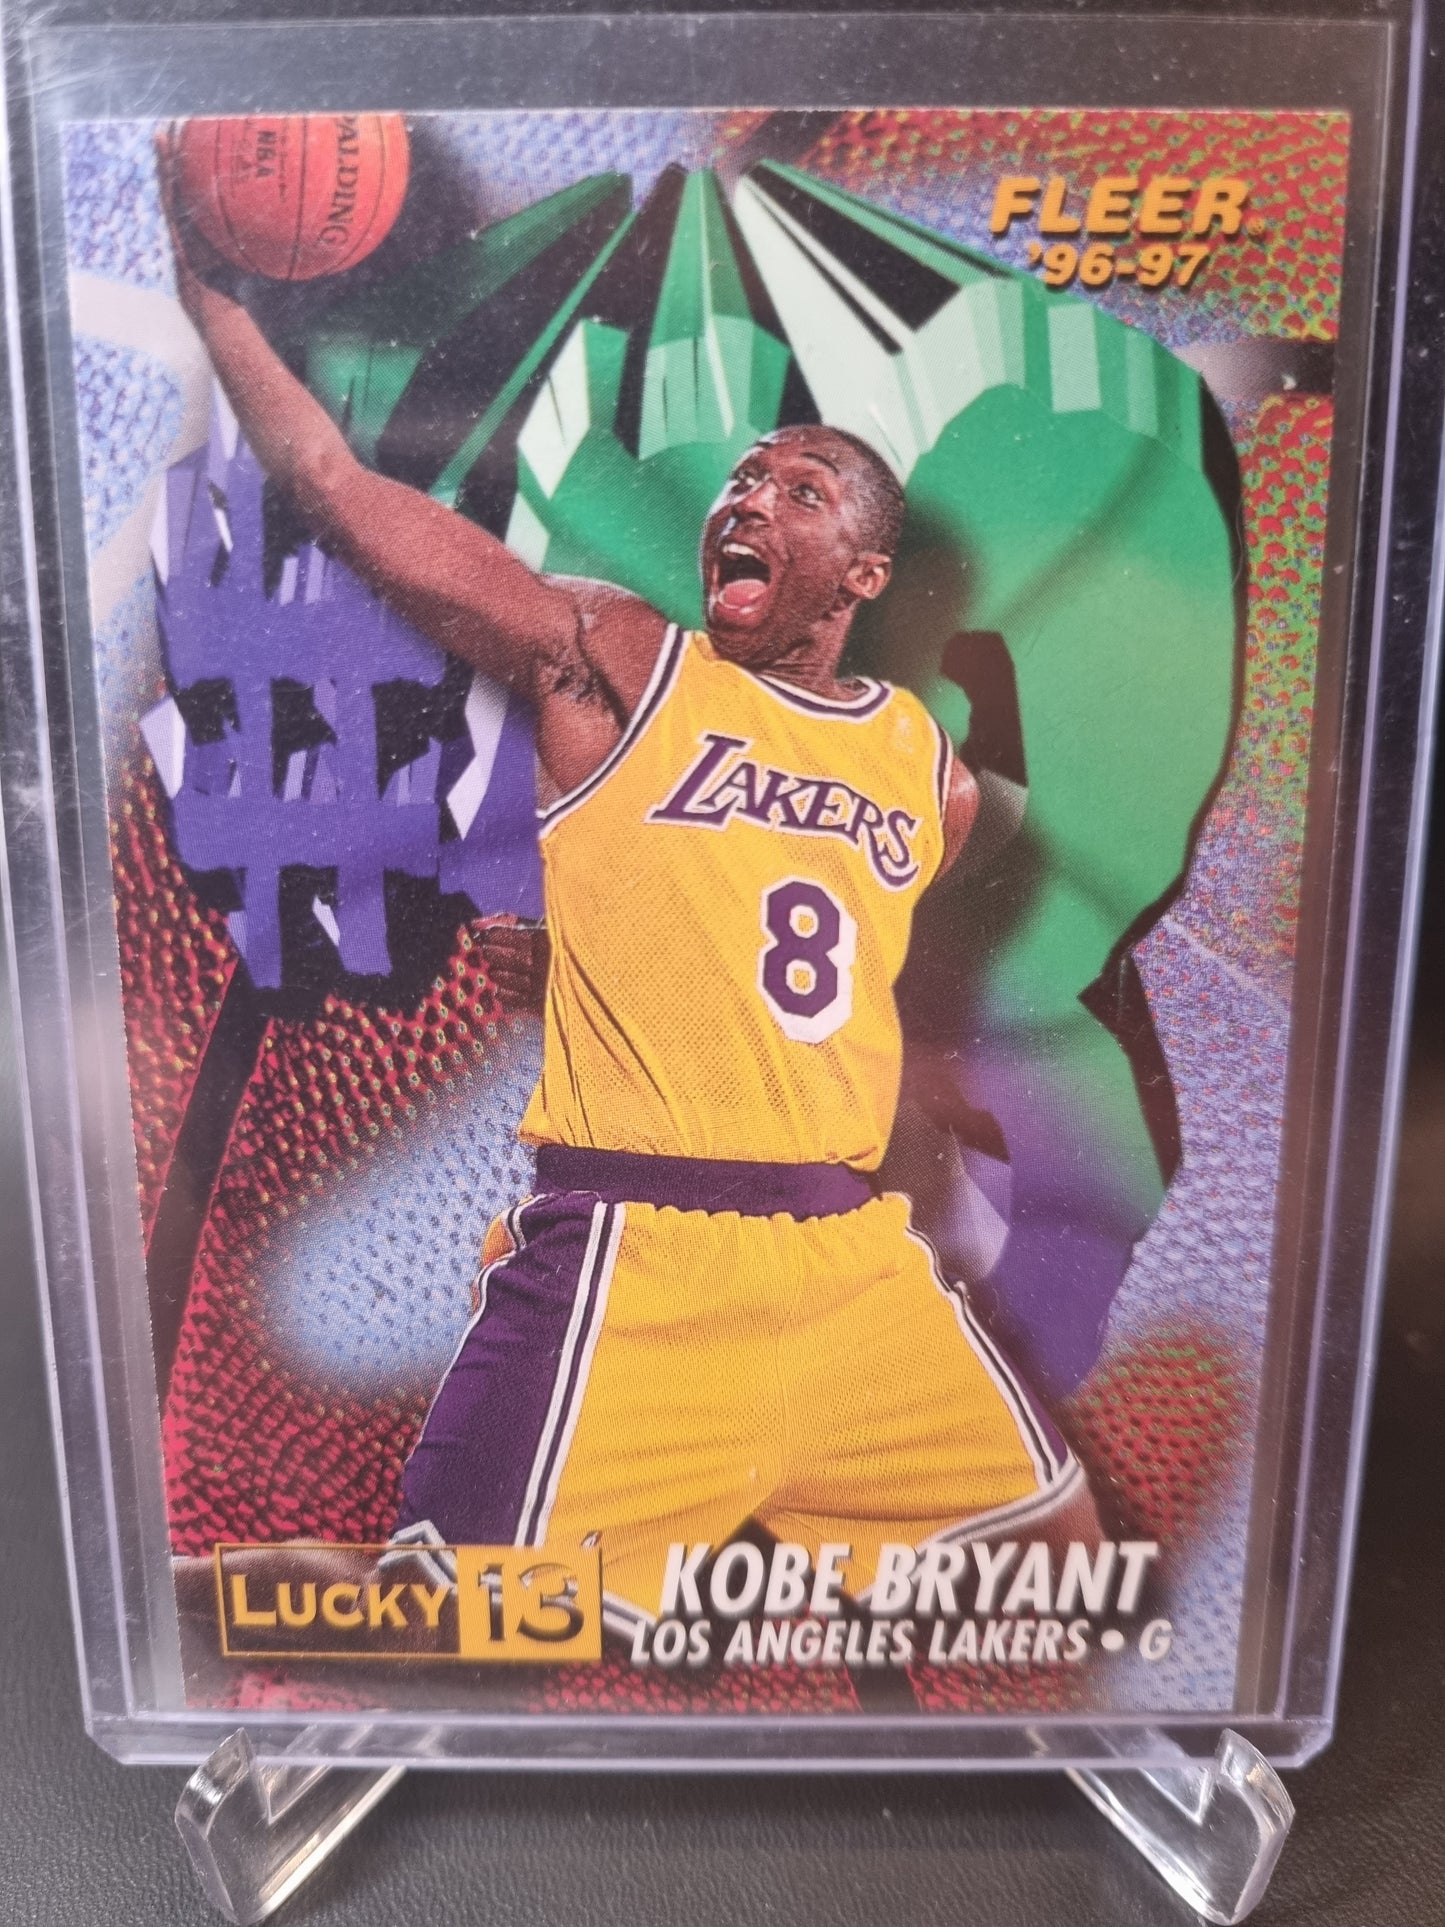 1996-97 Fleer #1 to 13 Full Set Lucky 13 Rookie Cards Including Kobe Bryant and Allen Iverson Rookie Card